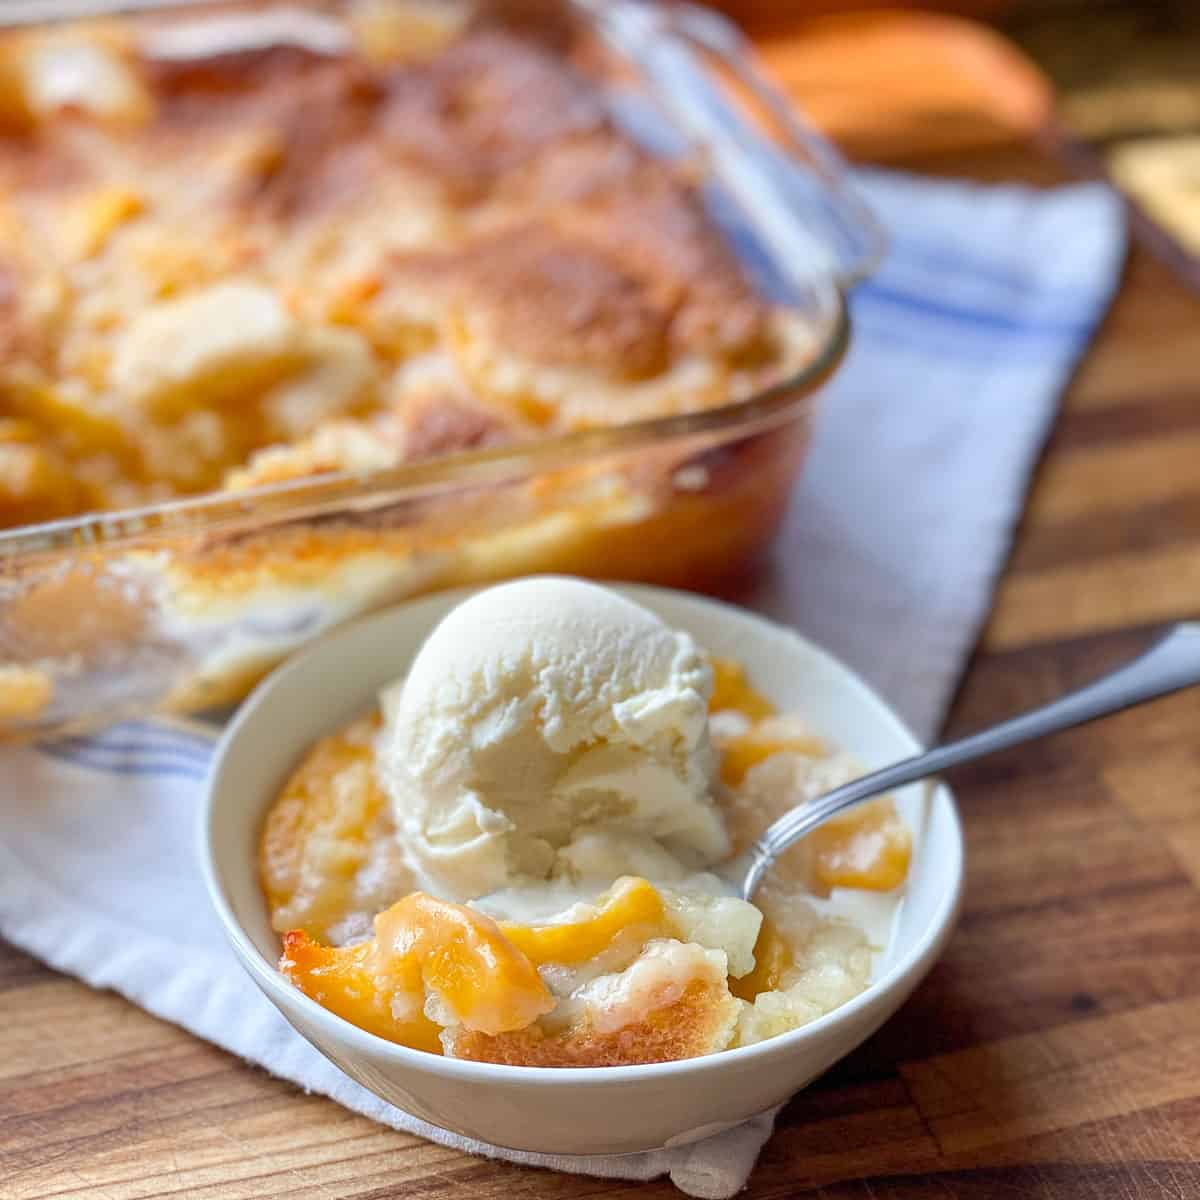 Image of a bowl of the Best Peach Cobbler with vanilla ice cream.